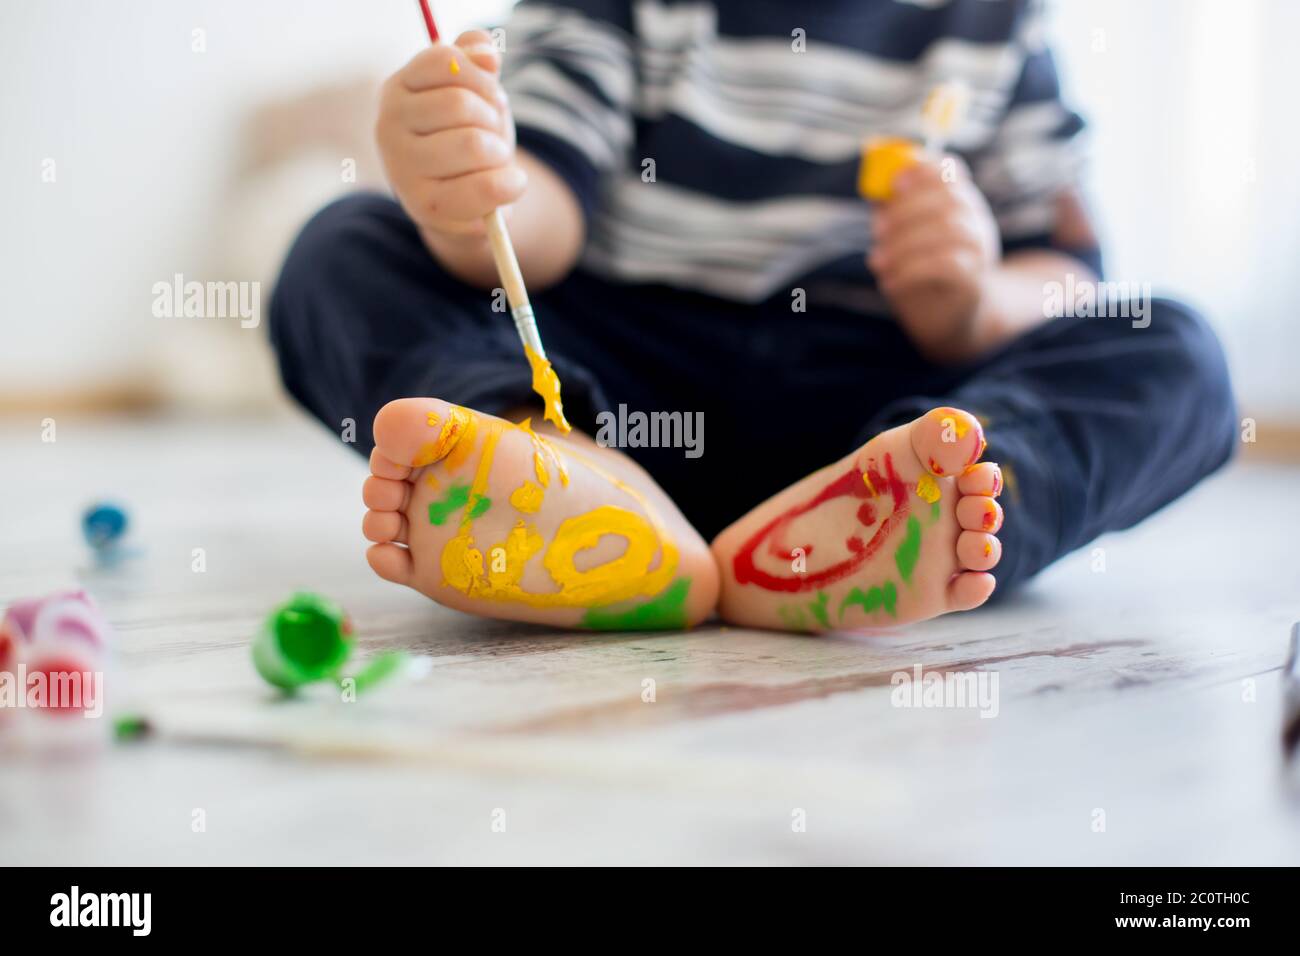 Brothers, playing at home, painting on their feet, tickling, laughing and smiling Stock Photo